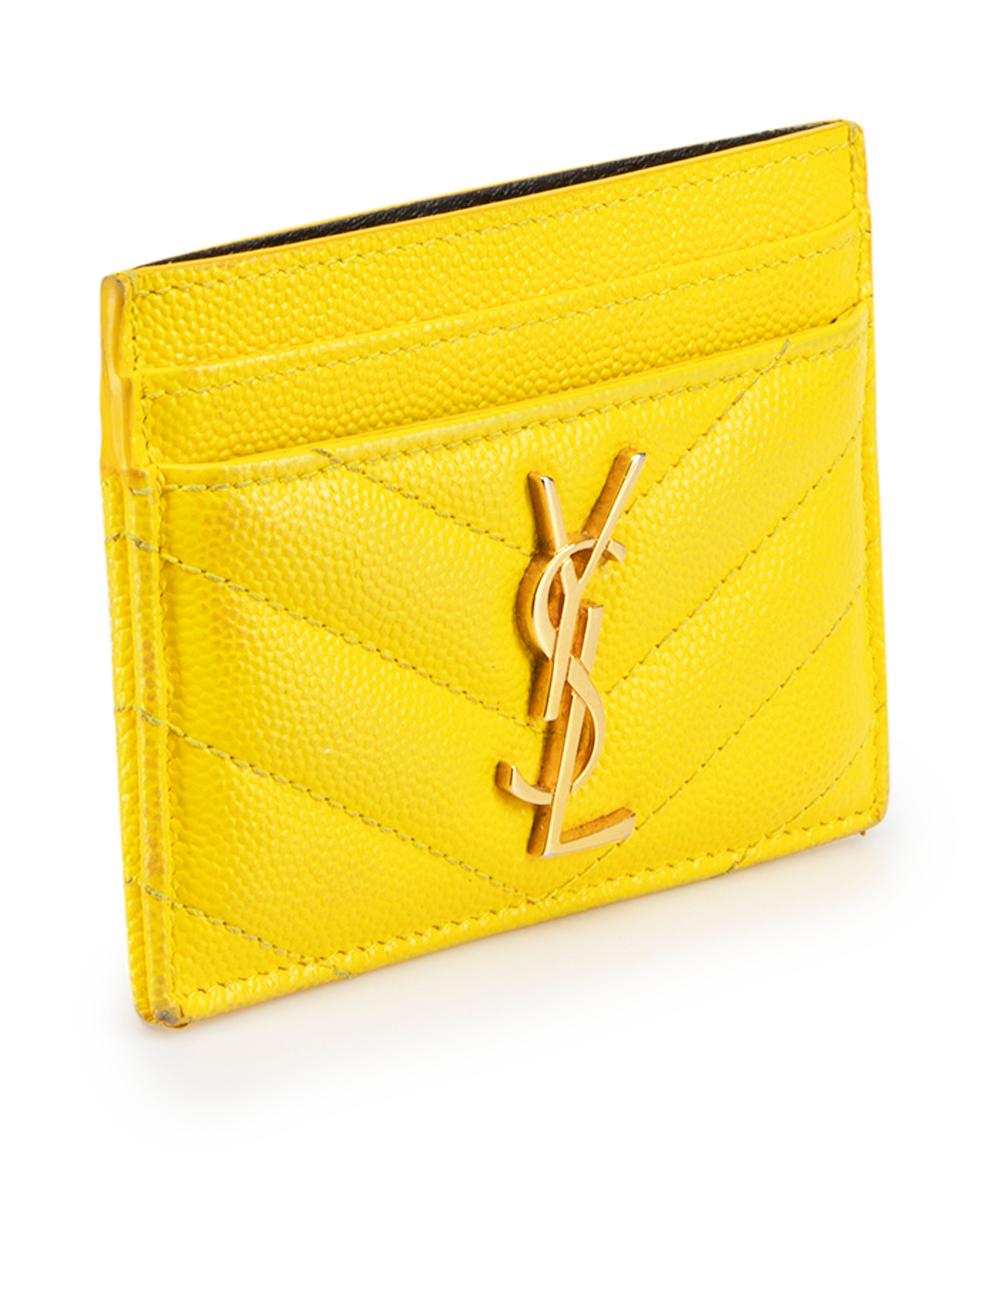 CONDITION is Good. Minor wear to card holder is evident. Light wear to the stitching with discolouration to the thread and minor scuffs to the corners, rear and rear card slot trim on this used Saint Laurent designer resale item. This item comes